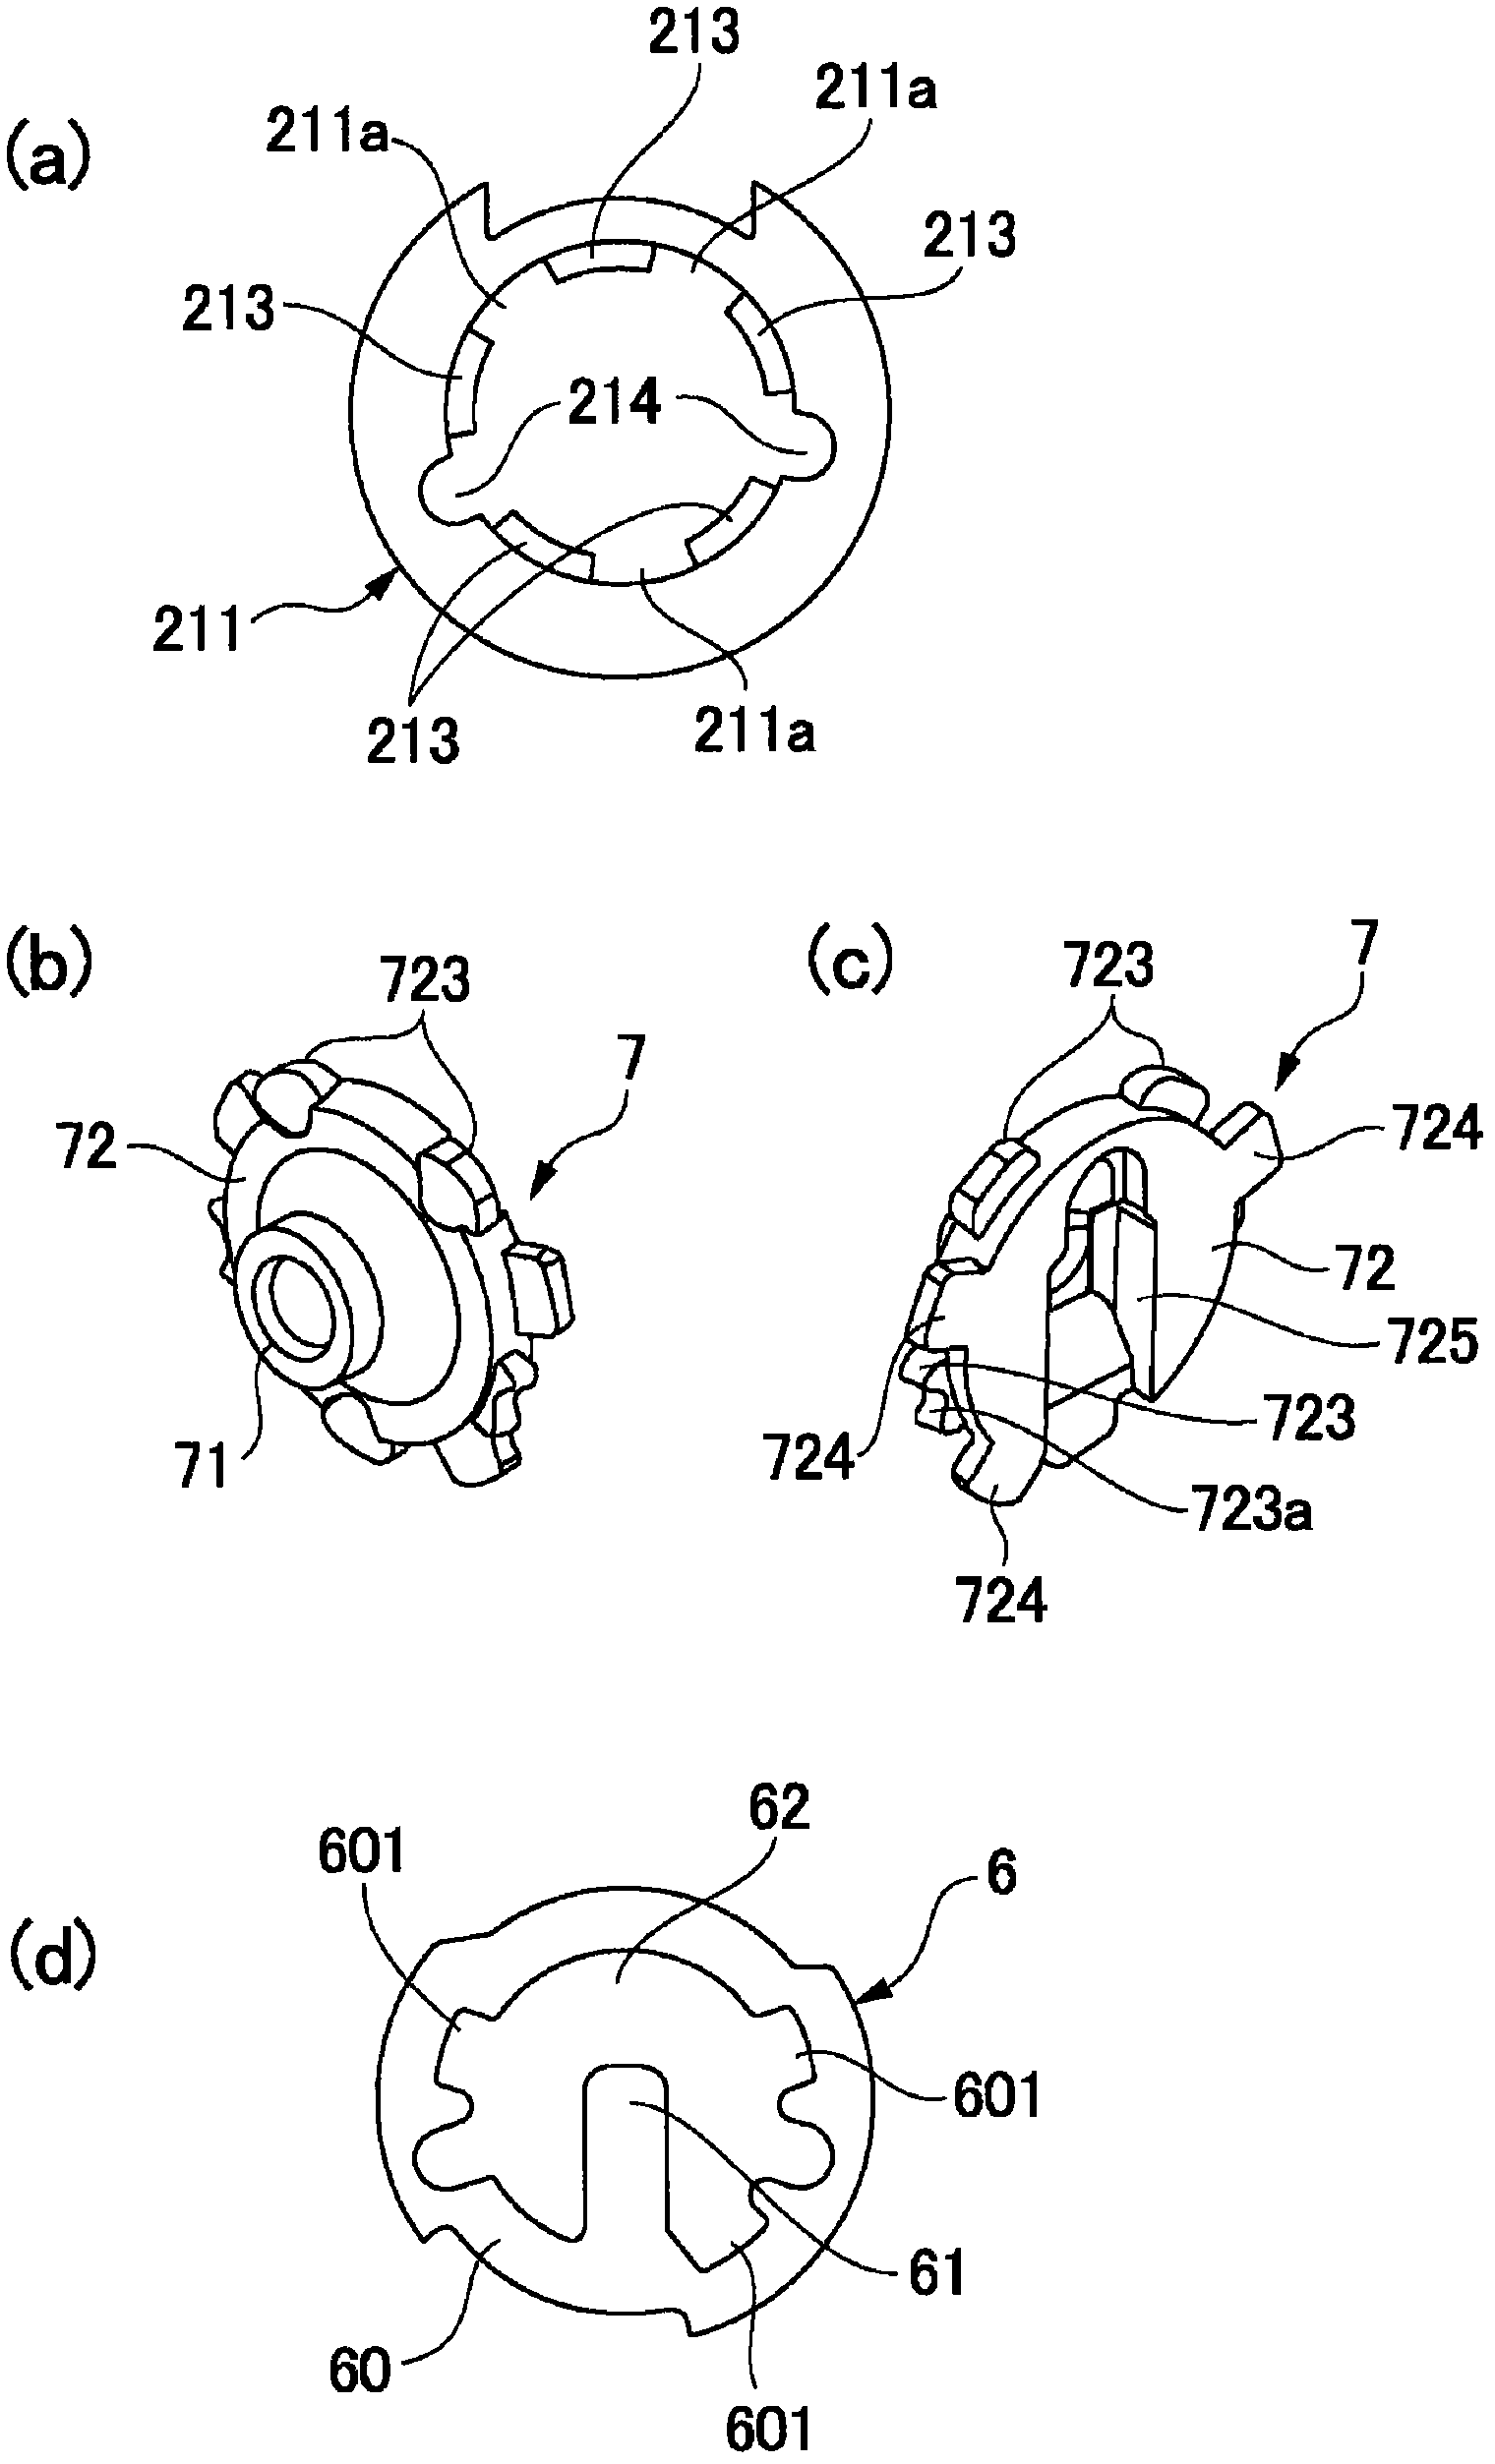 Rotor for motor and motor